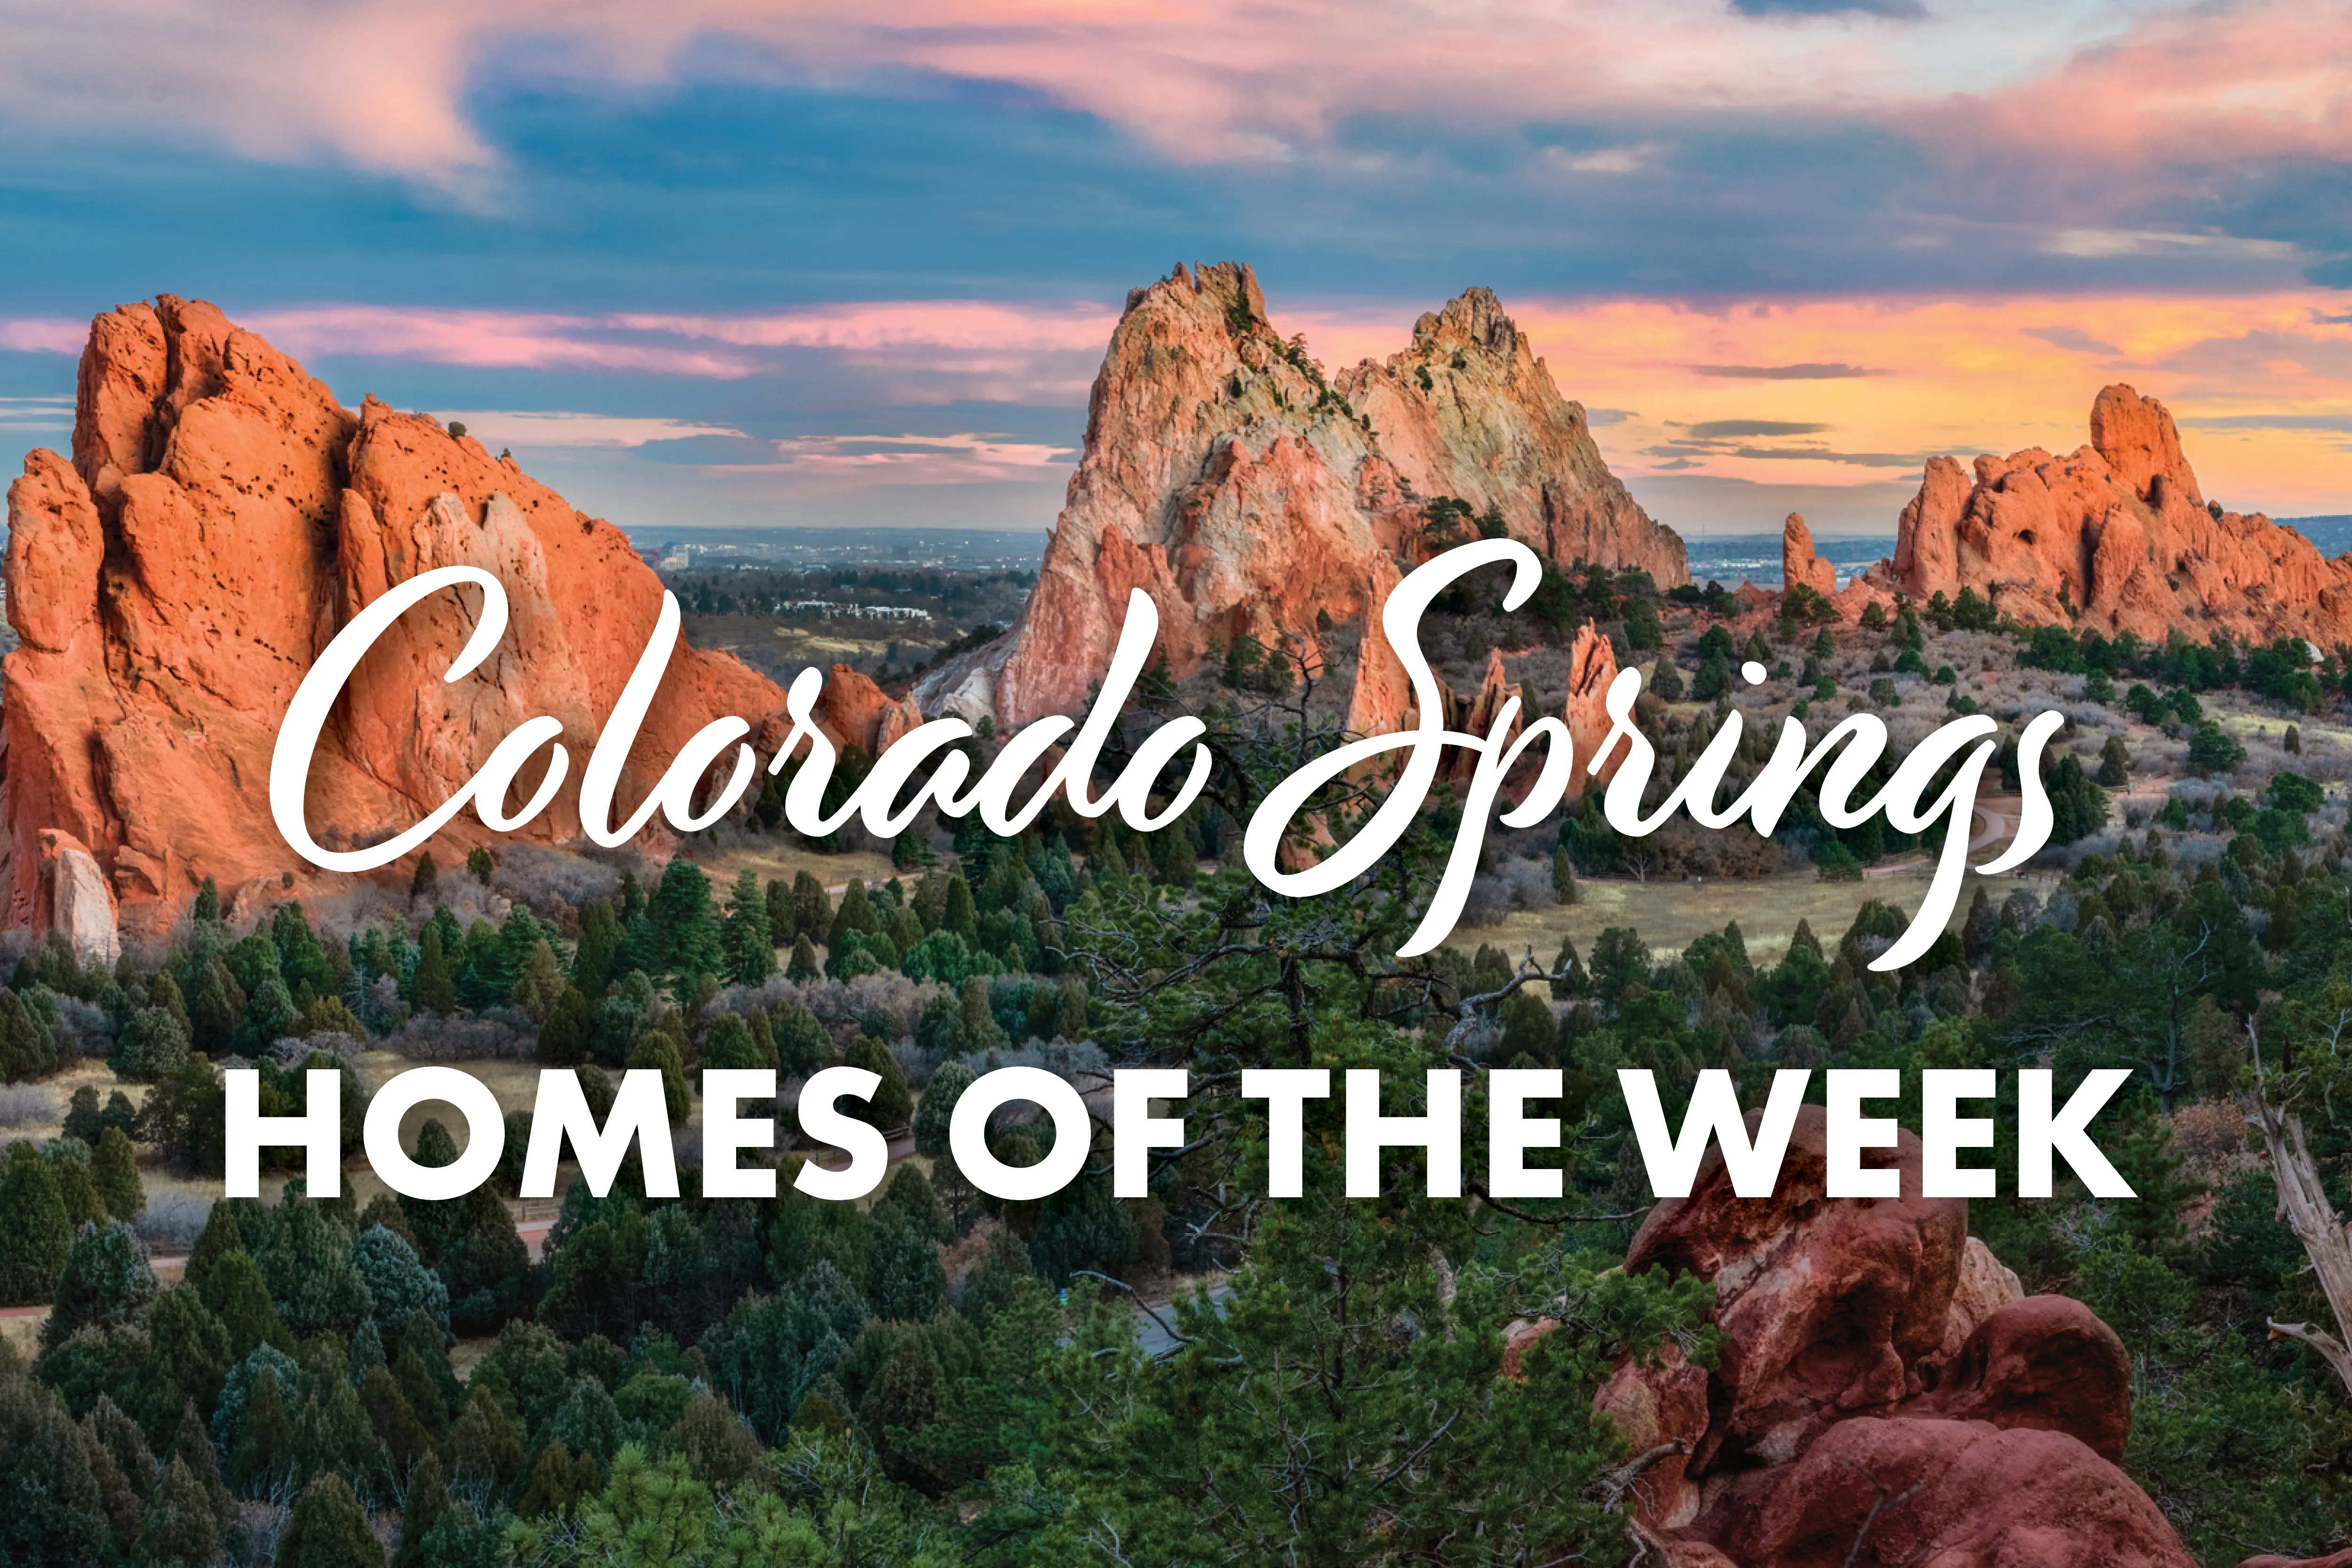 Southern Colorado homes of the week